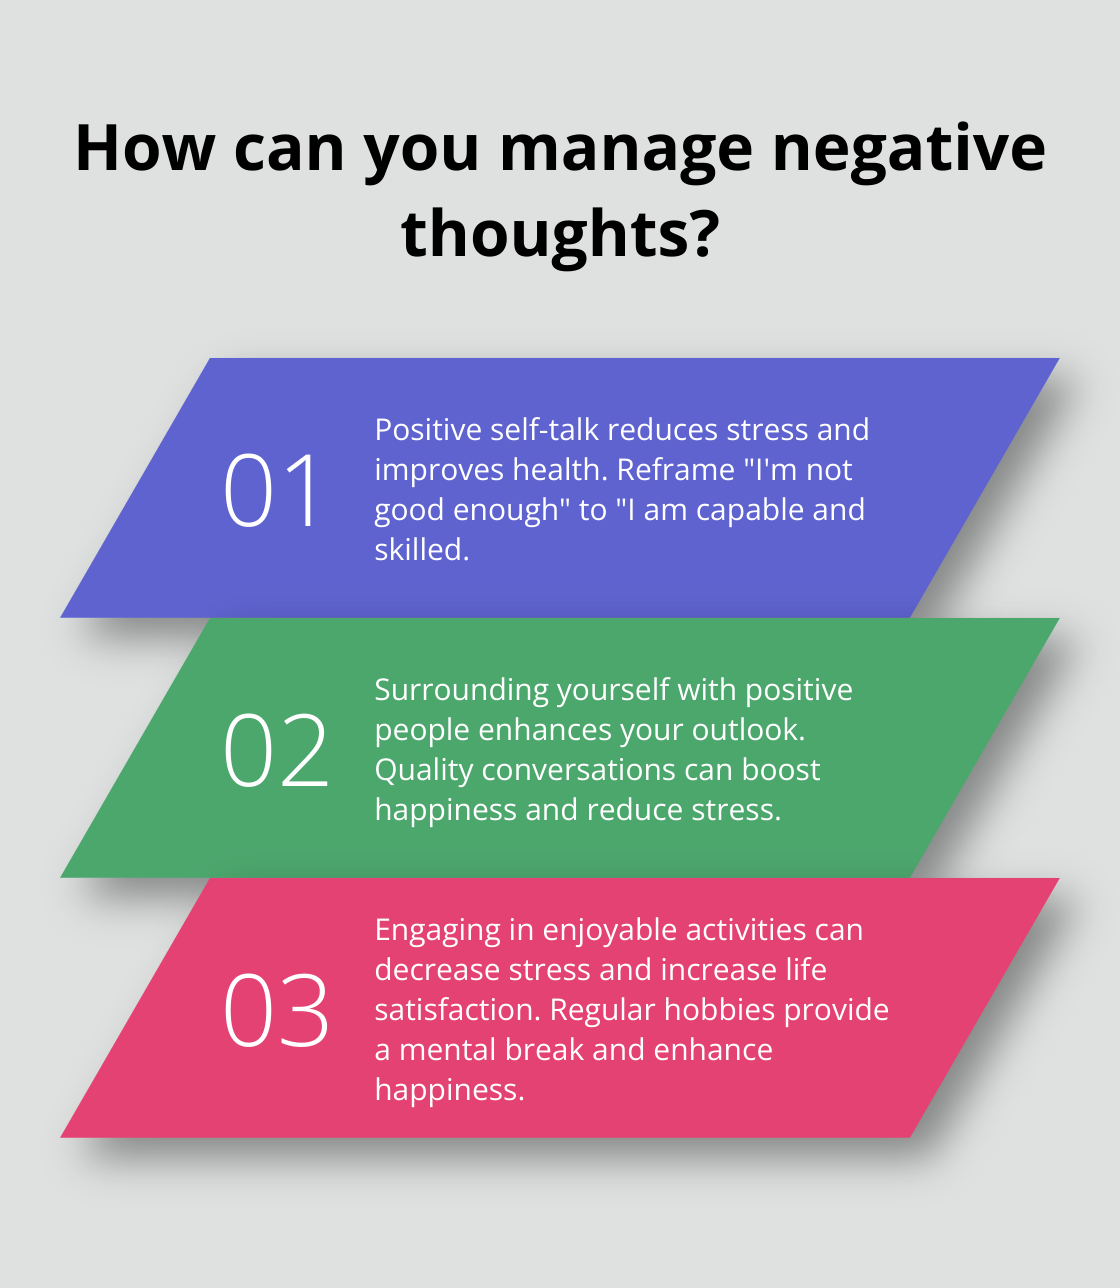 Fact - How can you manage negative thoughts?